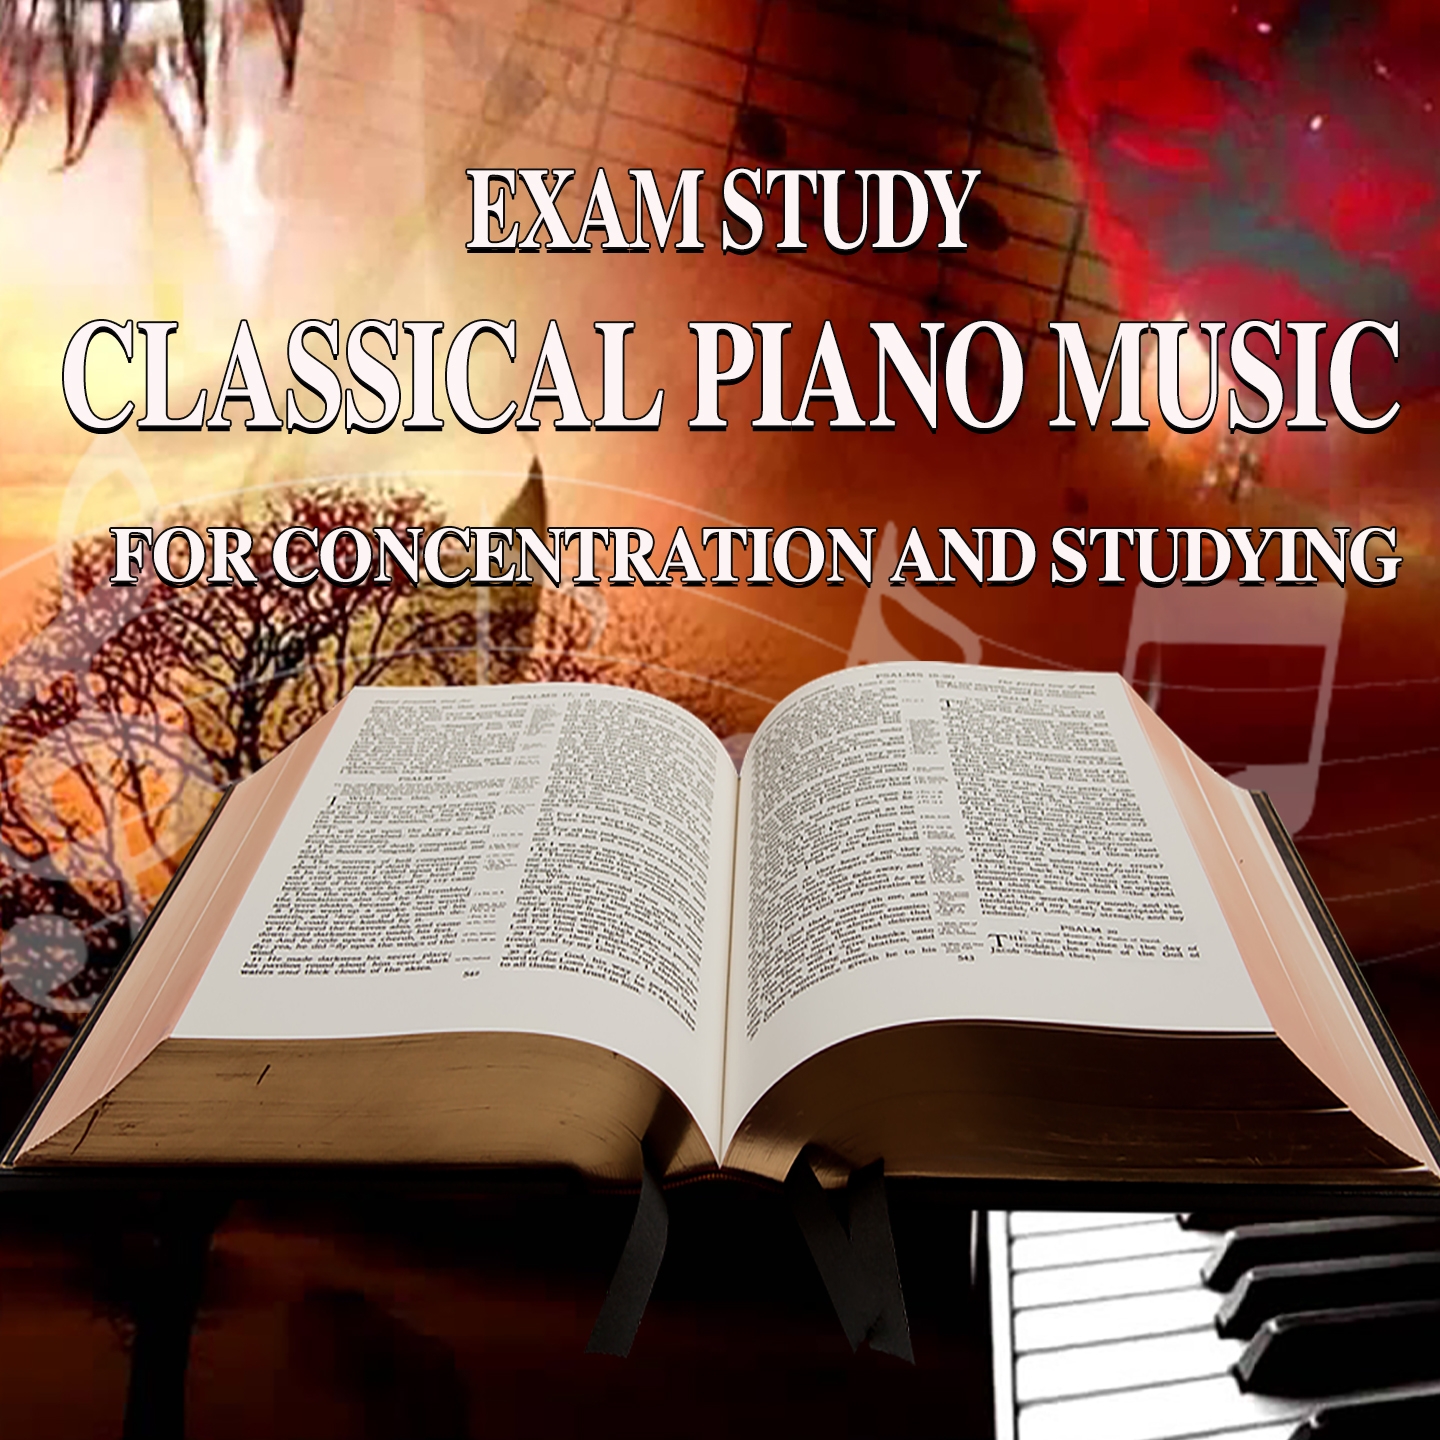 Exam Study: Classical Piano Music for Concentration and Studying